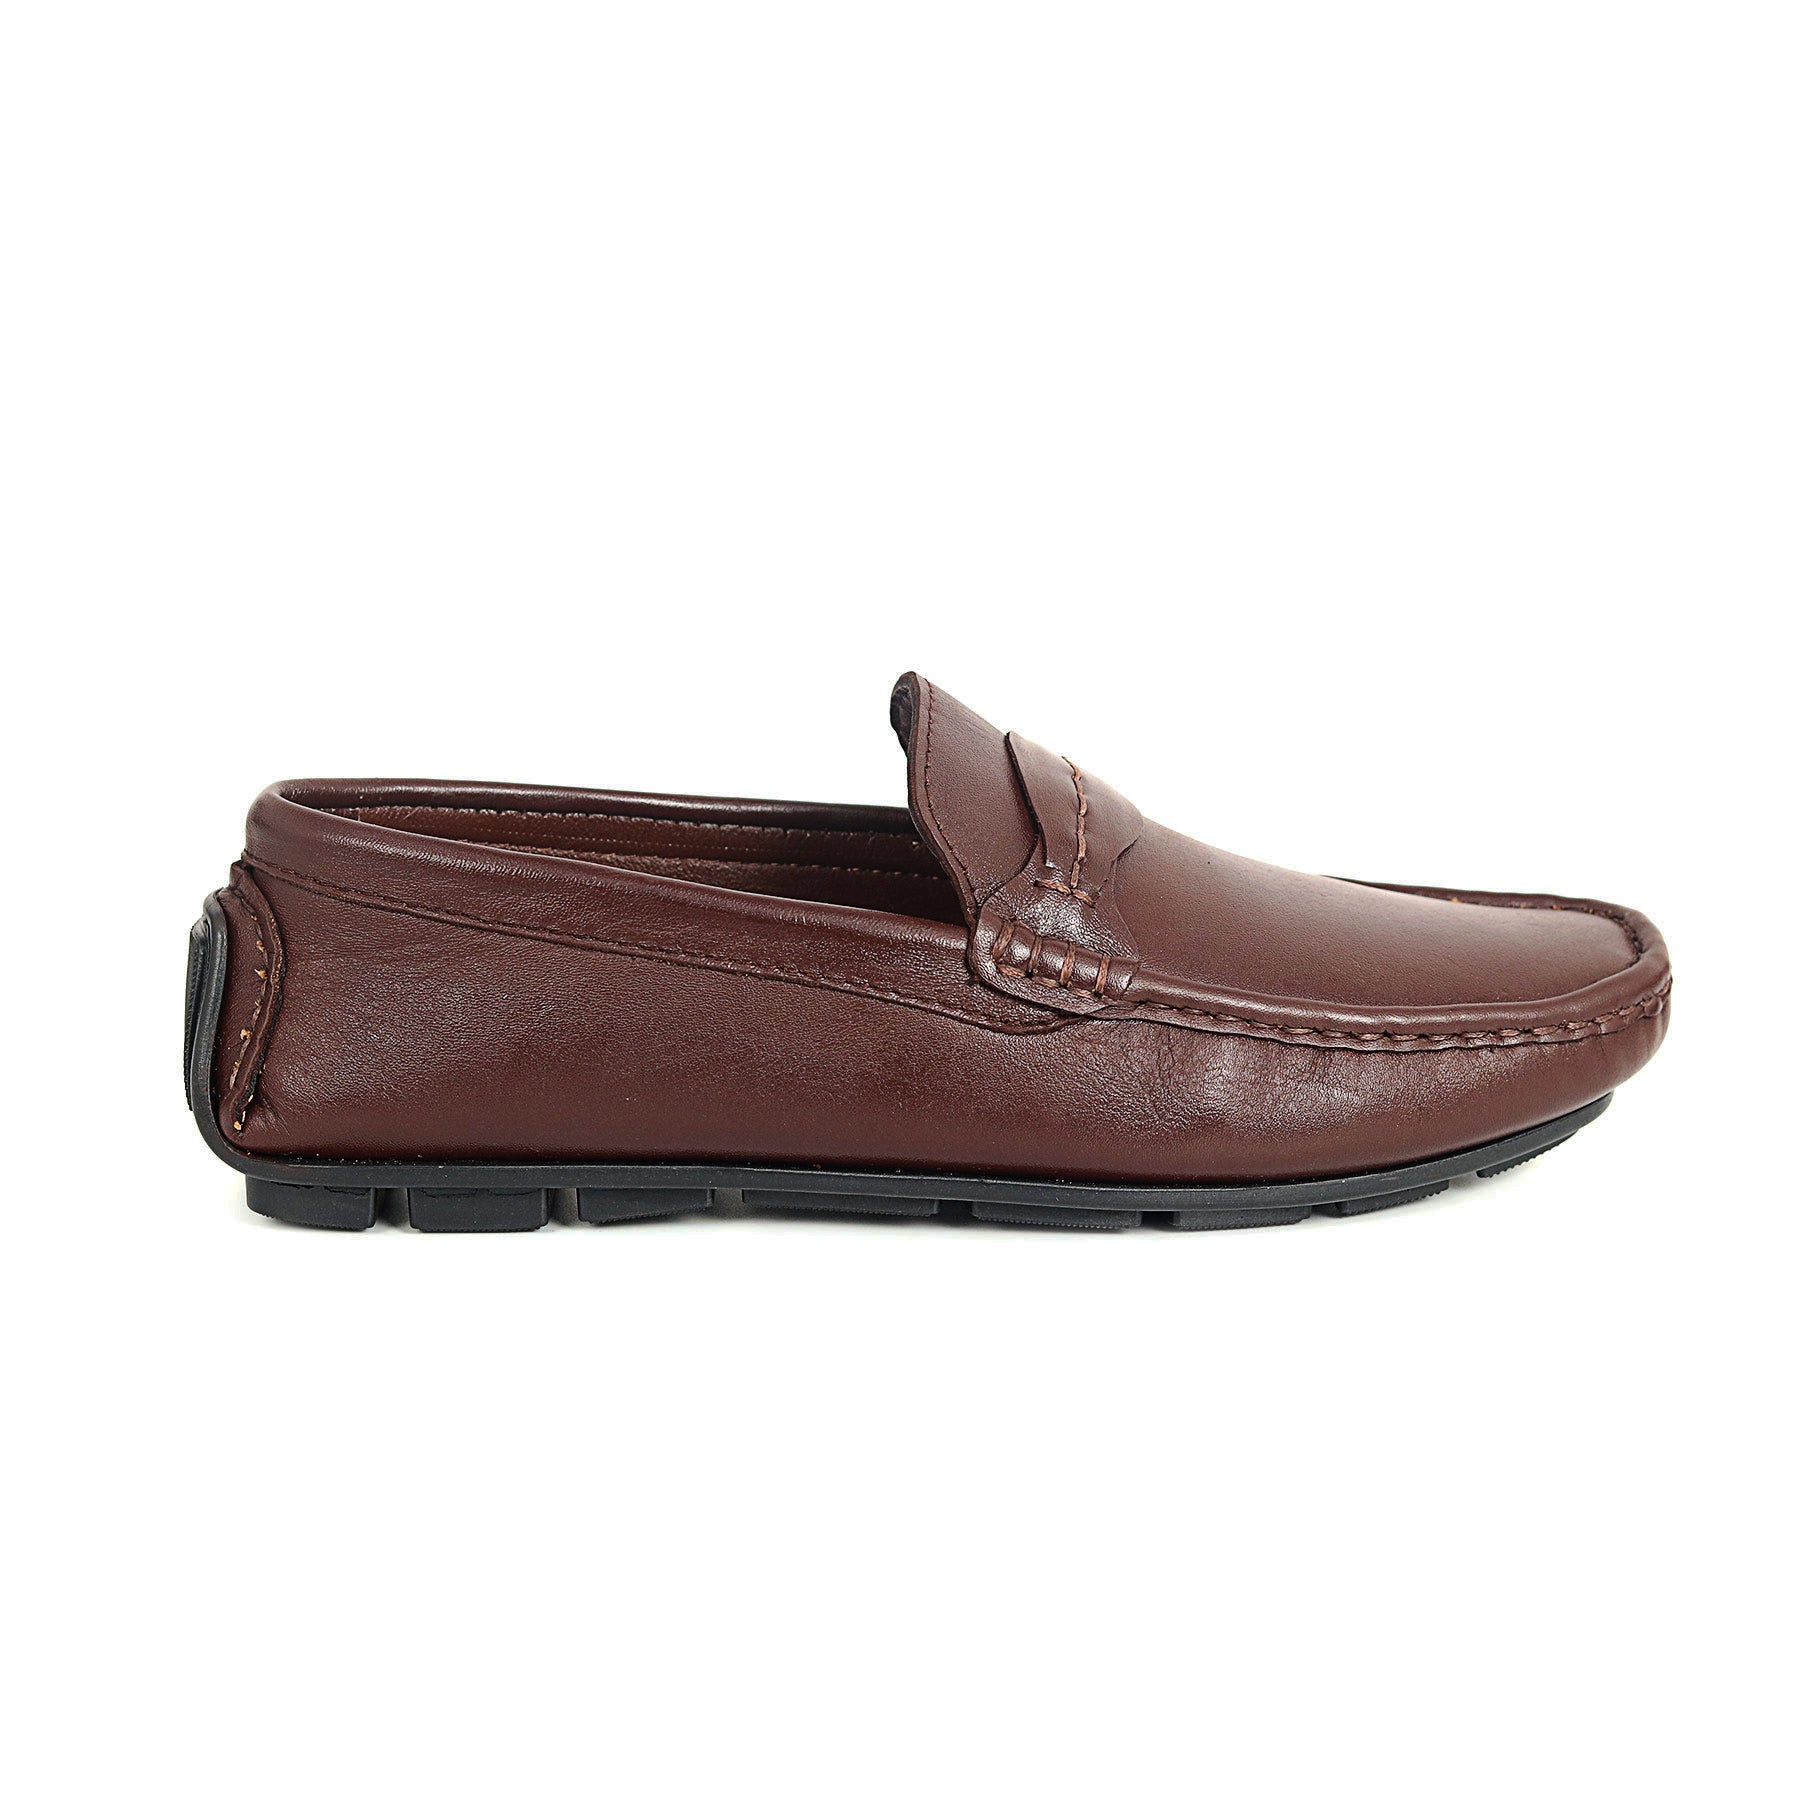 Zays Leather Loafer Shoe For Men (Chocolate) - ZAYSSF36